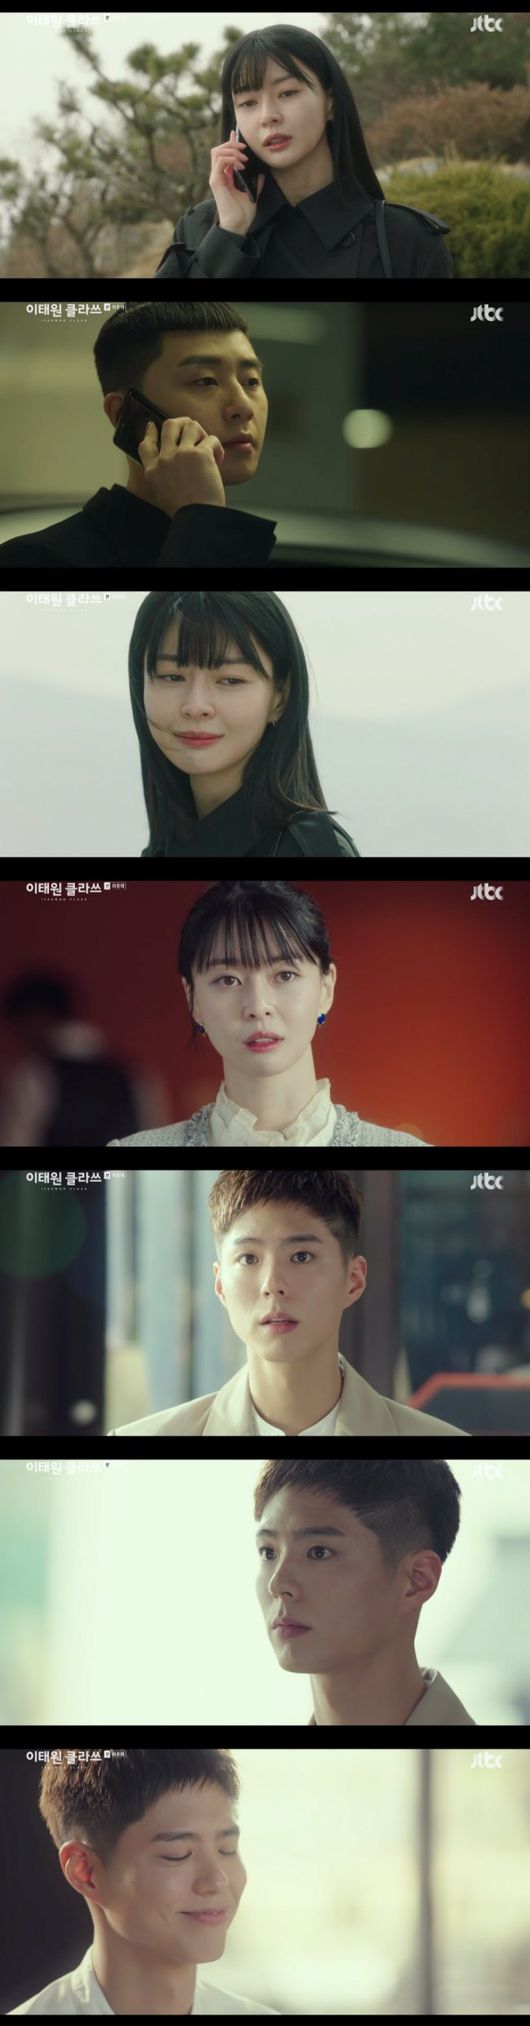 Itaewon Klath Park Bo-gum, is there such a perfect special appearance?Park Bo-gum of the righteousness brilliantly illuminated the last episode of JTBC gilt drama Itaewon Klath (playplayplay by Cho Kwang-jin, director Kim Seong-yoon).It appeared as a handsome Chef, capturing attention, foreshadowing the formation of a new relationship with Oh Soo-ah (Kwon Nara Boone); it is the last episode that was richer with the appearance of Park Bo-gum.In the last episode of Itaewon Klath, which aired on the afternoon of the 21st, Oh Soo-ah (Kwon Nara) was shown quitting the company as an whistleblower when he accused the prosecution of corruption in the house.Oh Soo-ah has only now escaped from the long house and paid a little debt to Park Sung-yeol (Son Hyun-joo), a father-like person who helped him.Oh Soo-ah left Jangga and paid Park Sung-yeol the debt of his heart, and he was free from Park (Park Seo-joon).He said he would live a real life for himself, and Roy cheered Oh Soo-ah as a friend. Oh Soo-ah asked him to be happy.The new start of Oh Soo-ah featured handsome Chef, who was well-run by opening a new store with investment from Hong Seok-cheon.And Park Bo-gum appeared as a handsome Chef, and Oh Soo-ah was drawn at first sight.Park Bo-gum made a special gift to viewers as he made a special appearance in the last episode of Itaewon Clath with Kim Seong-yoon PD, who had a relationship in the drama Gurmigreen Moonlight.At the end of the show, he appeared briefly as a handsome Chef, but his appearance was enough to focus attention. It was more special to his fans as he met in the drama for a long time.Park Bo-gums brilliant special appearance, could not be more perfect.JTBC broadcast screen capture